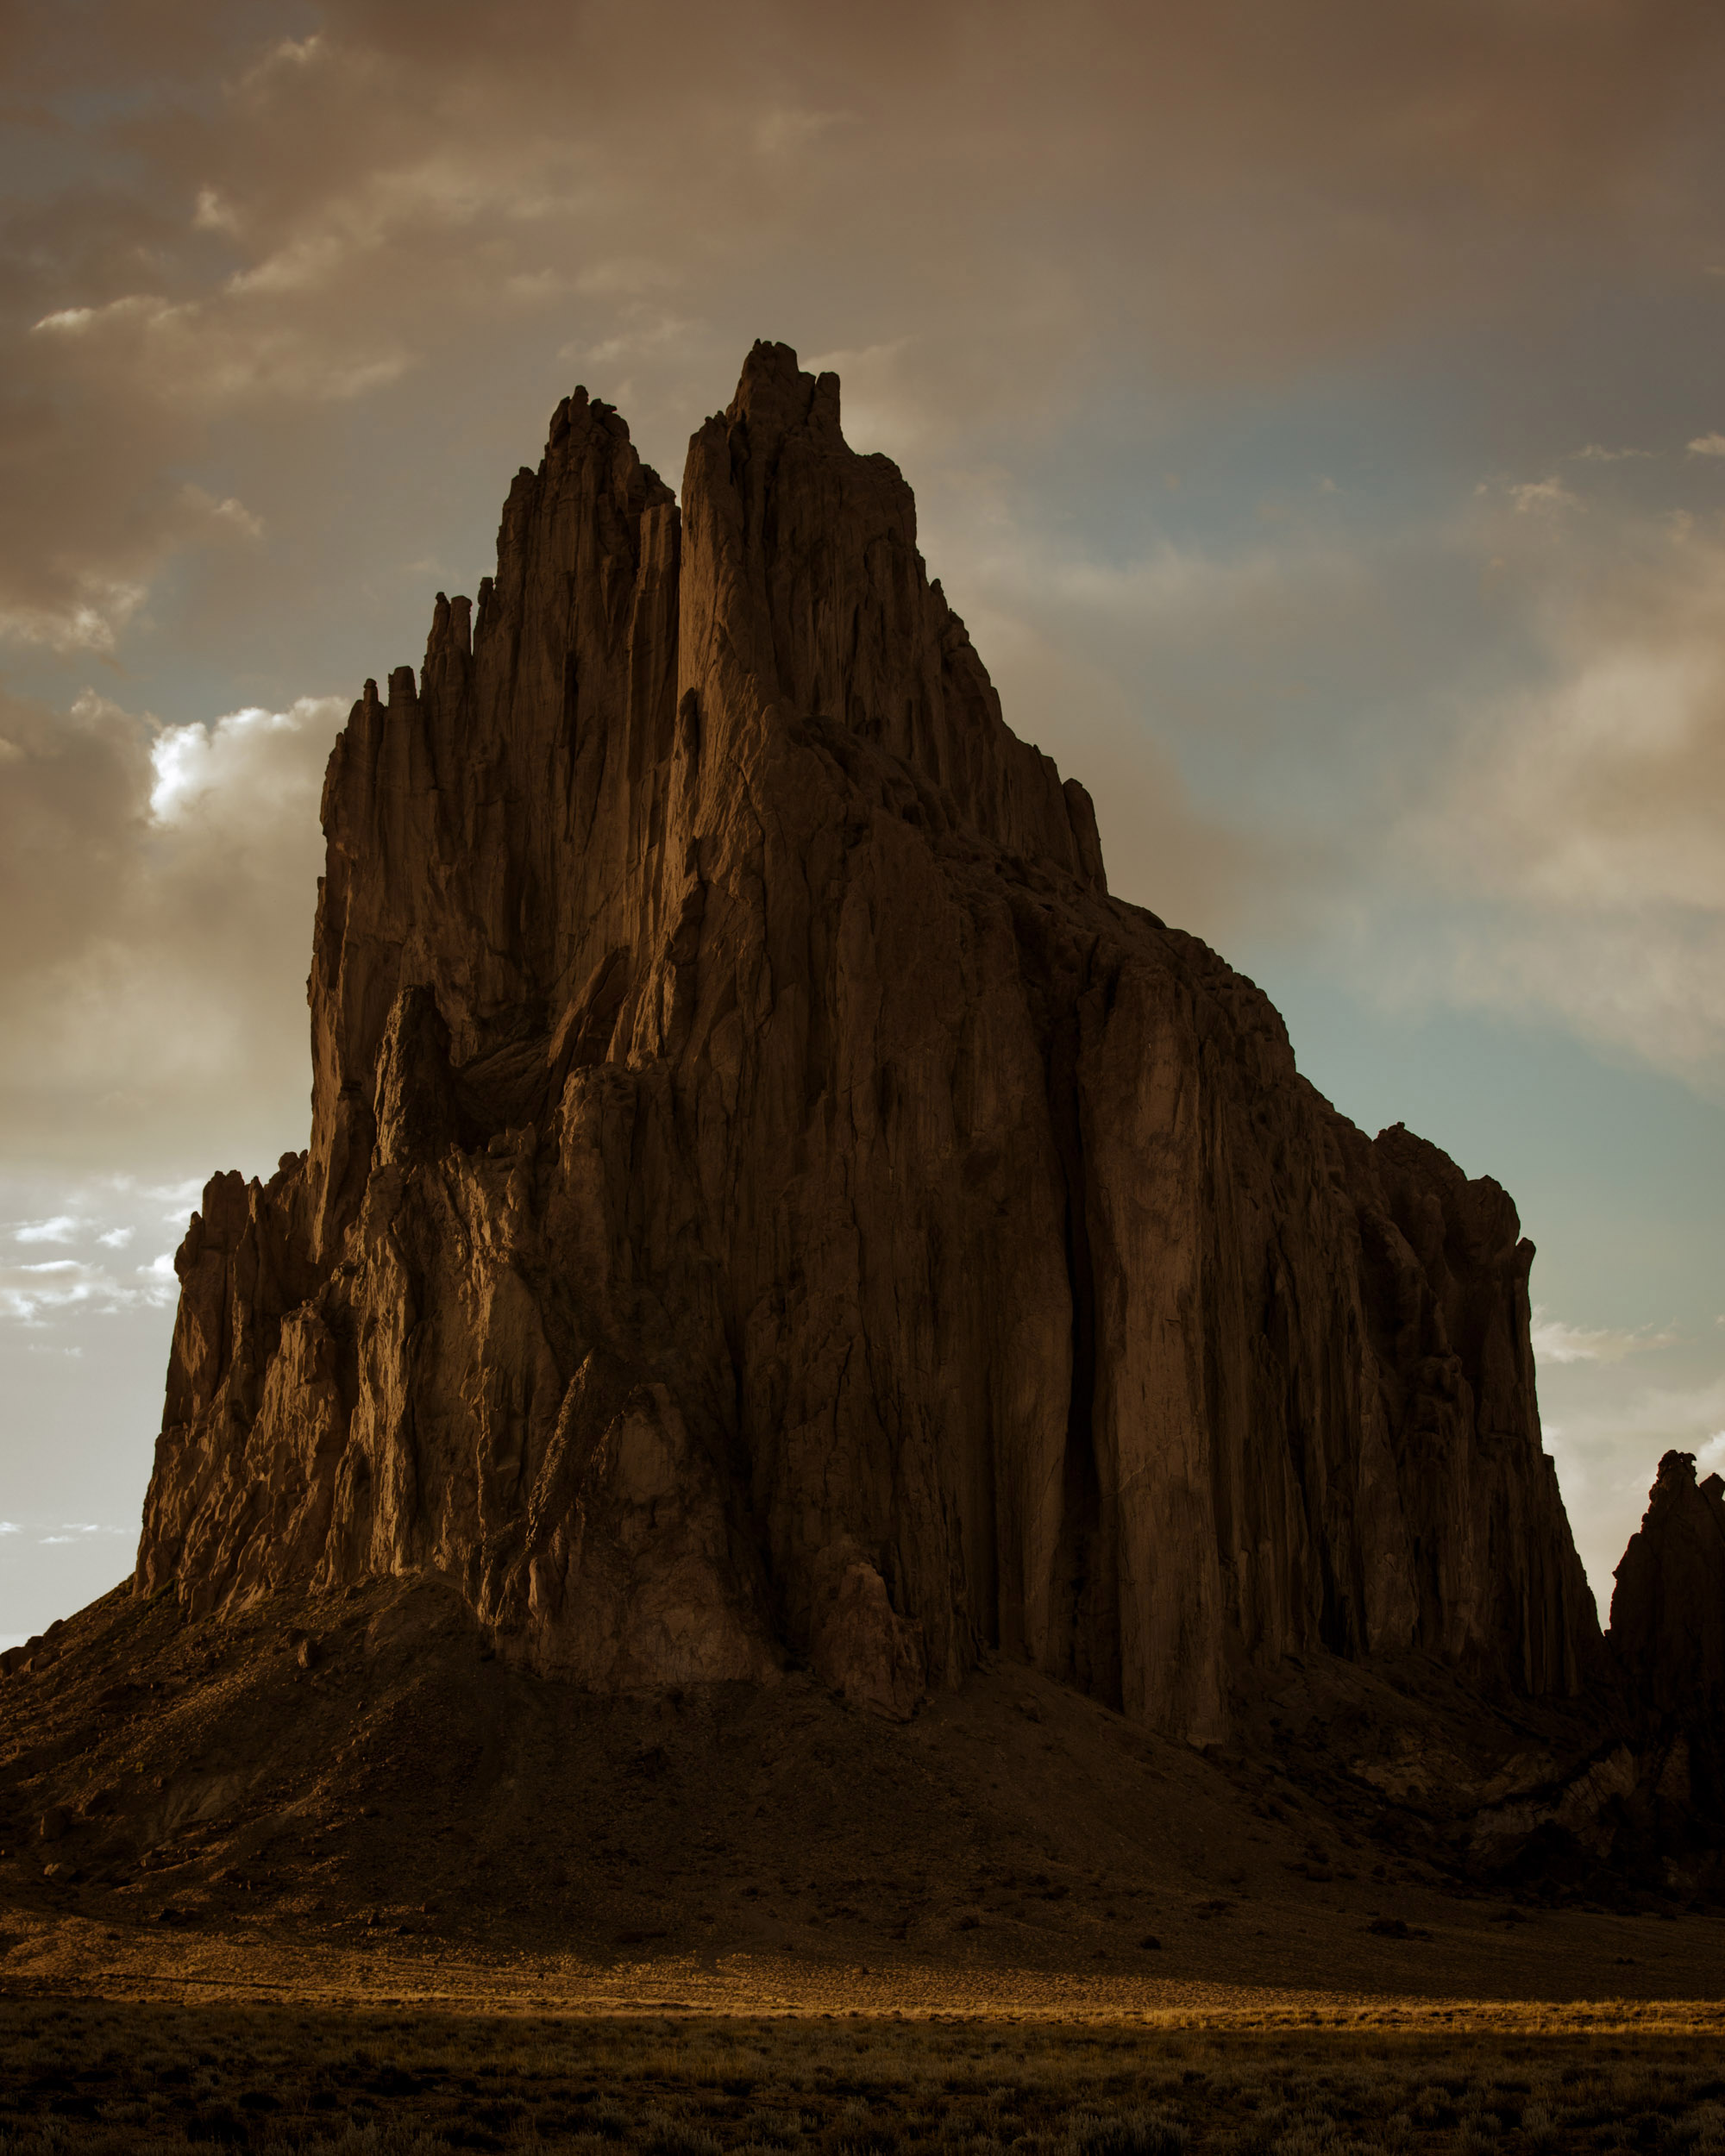 Shiprock monument. Standing at 1,583 feet, it is a centerpiece of Diné culture and spiritualism. Photo by Clarke Tolton.